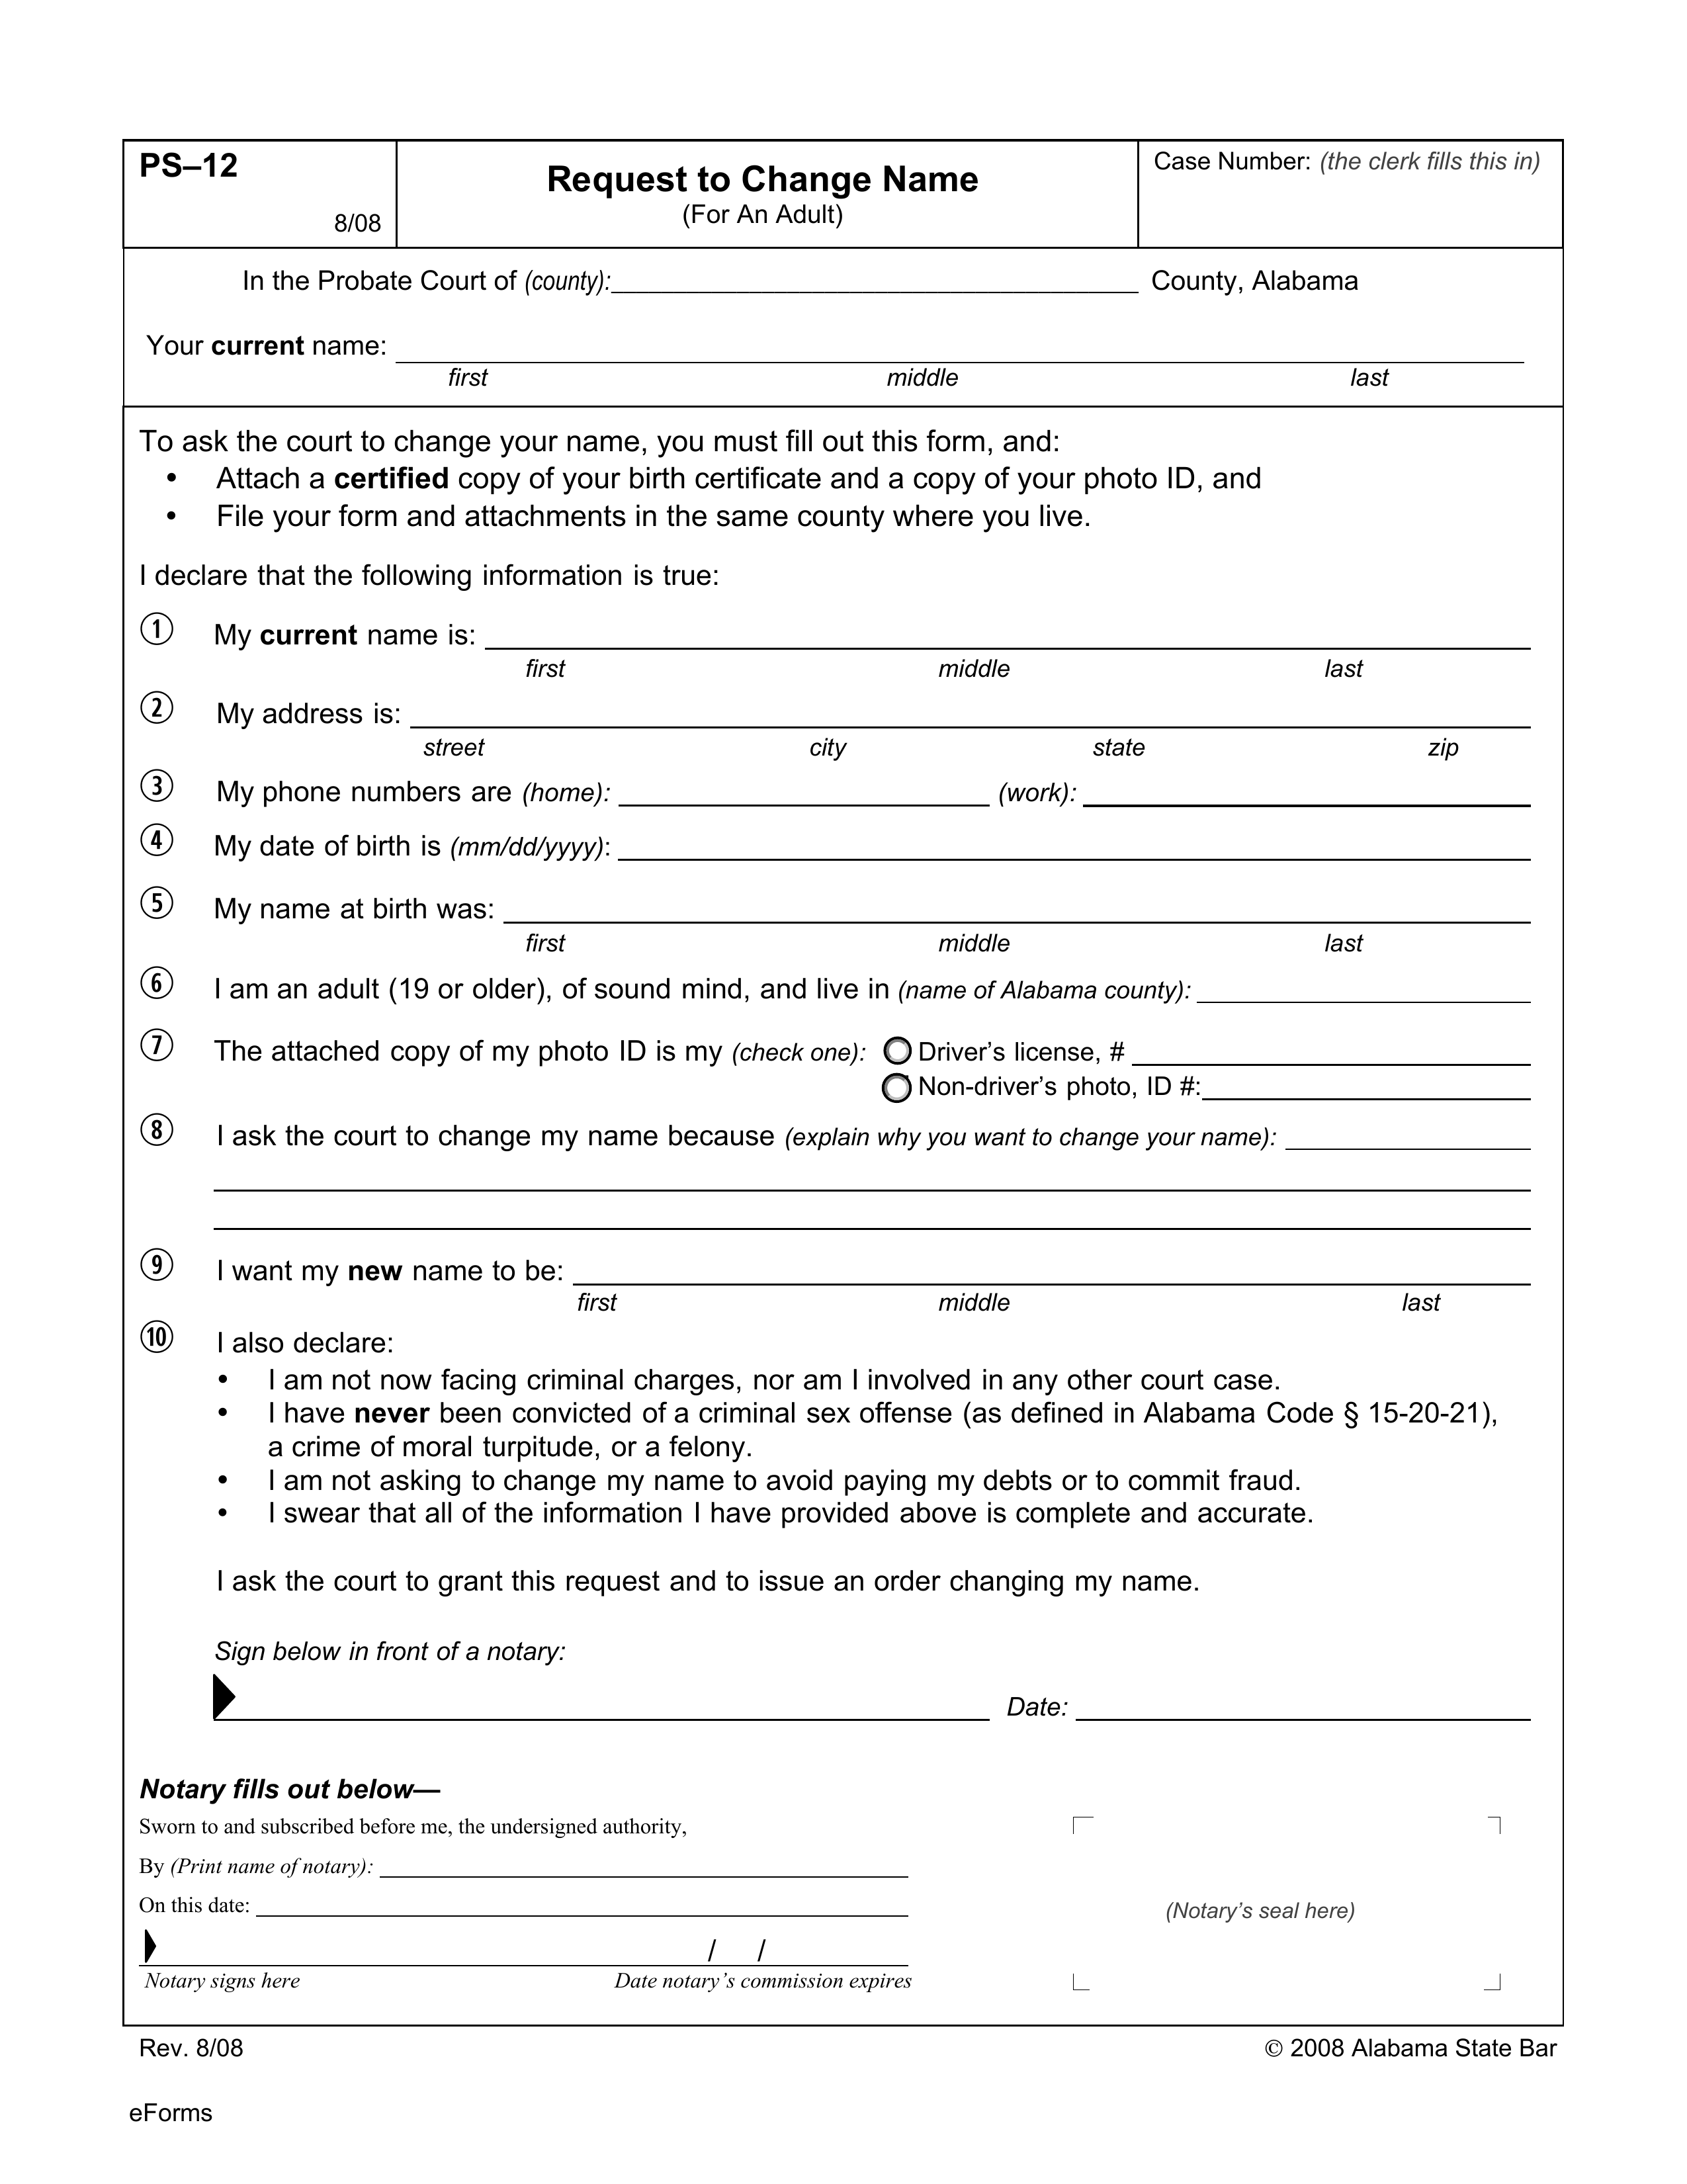 Alabama Name Change Forms | Request to Change Name (PS-12)